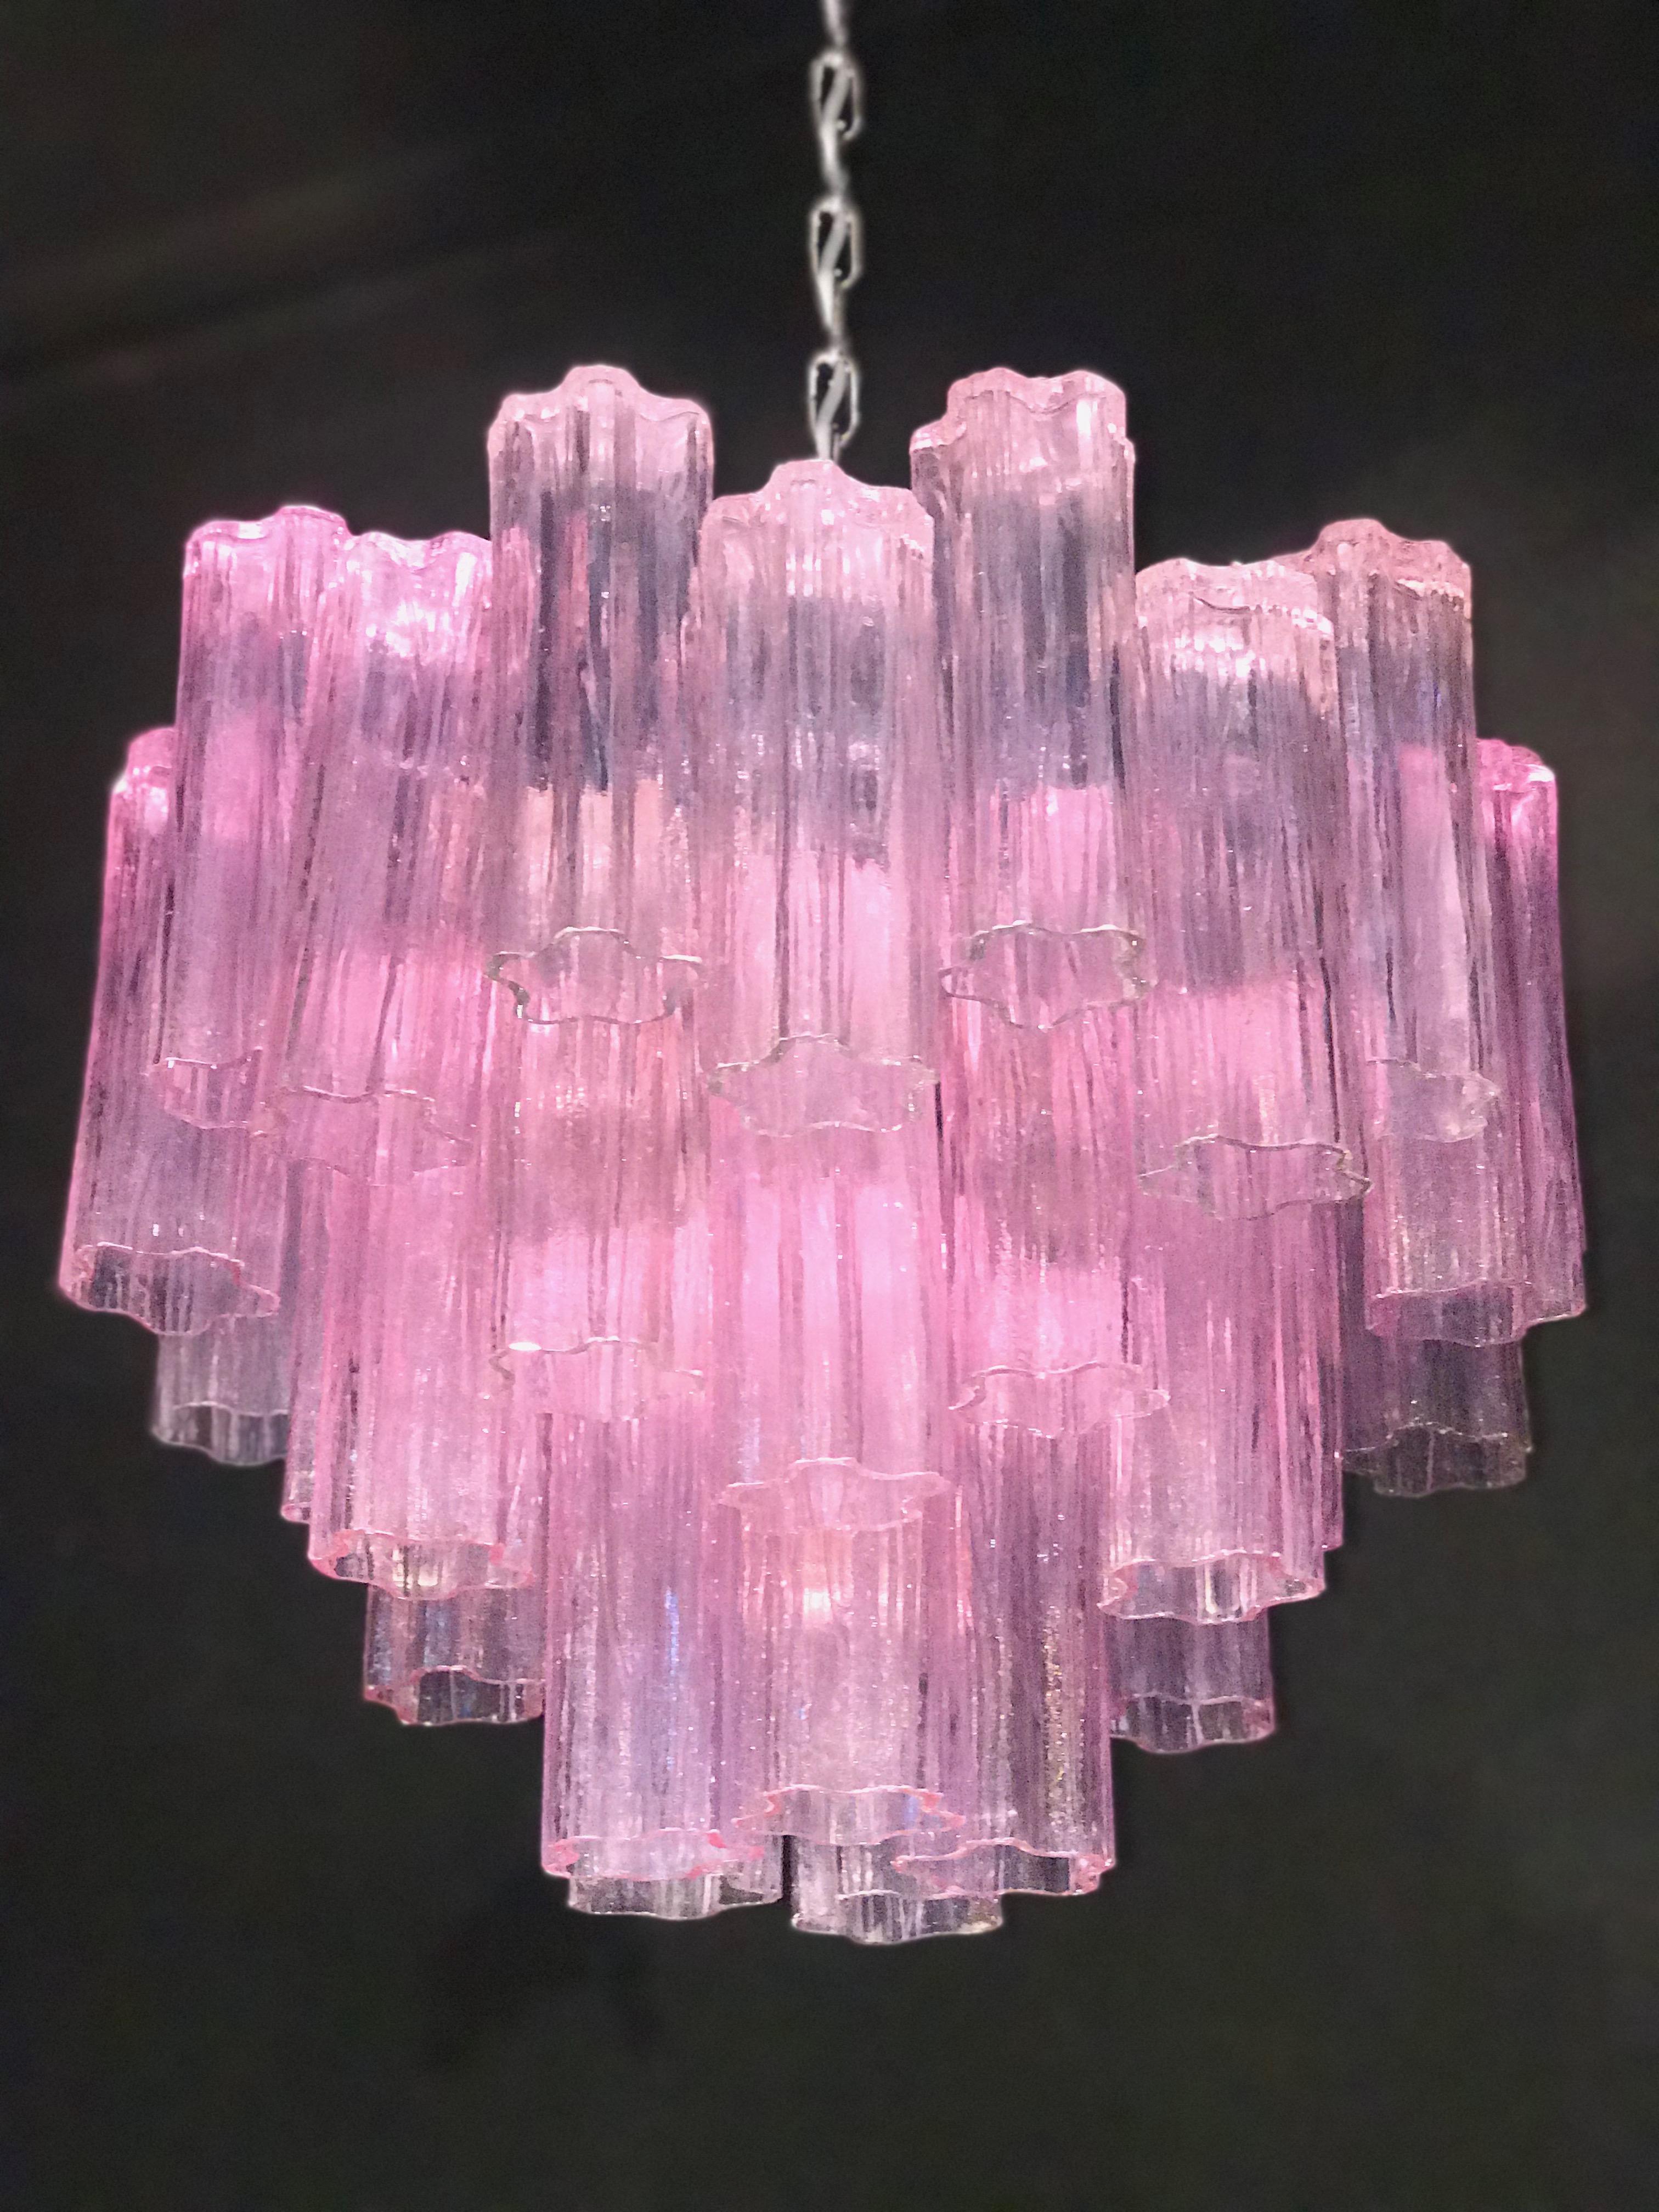 This amazing chandelier includes precious pink tronchi Murano glasses 20 cm long.
Nickel-plated metal structure on three levels,
Perfect vintage condition.
Seven E 27 light bulbs wired for US standards.
Available 8 chandeliers and 4 pairs of